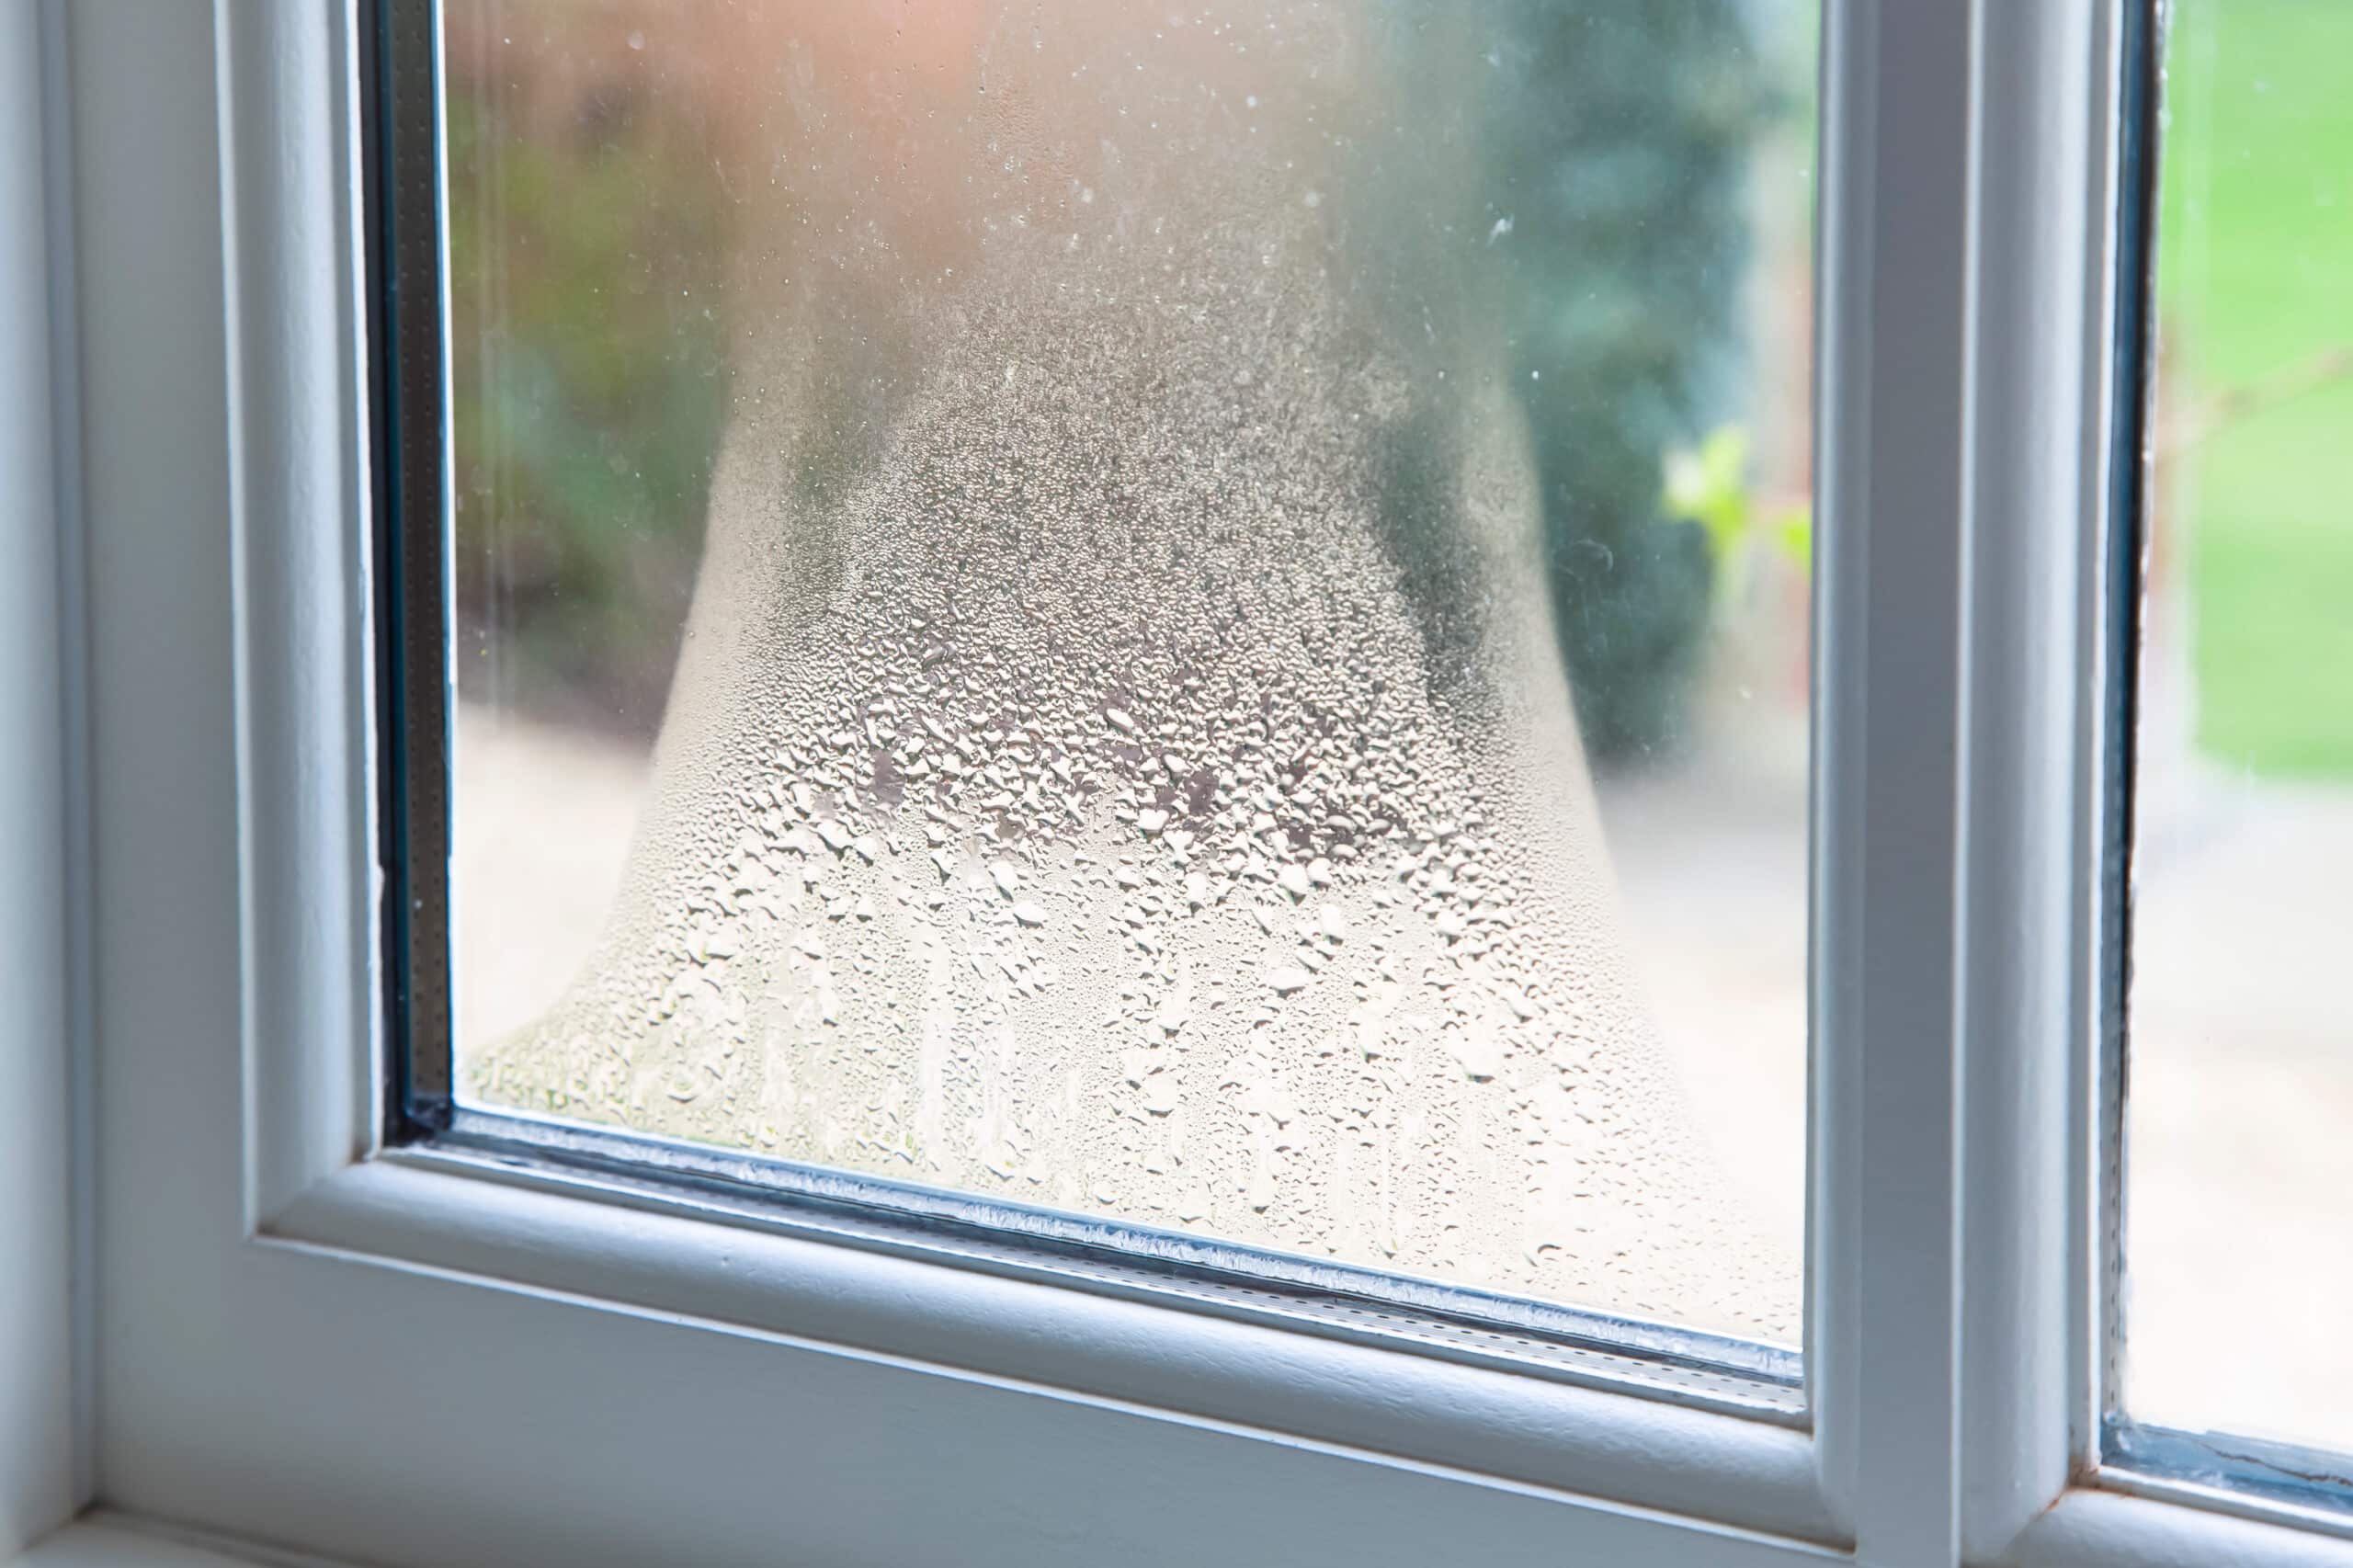 condensation on a window due to high humidity in a home